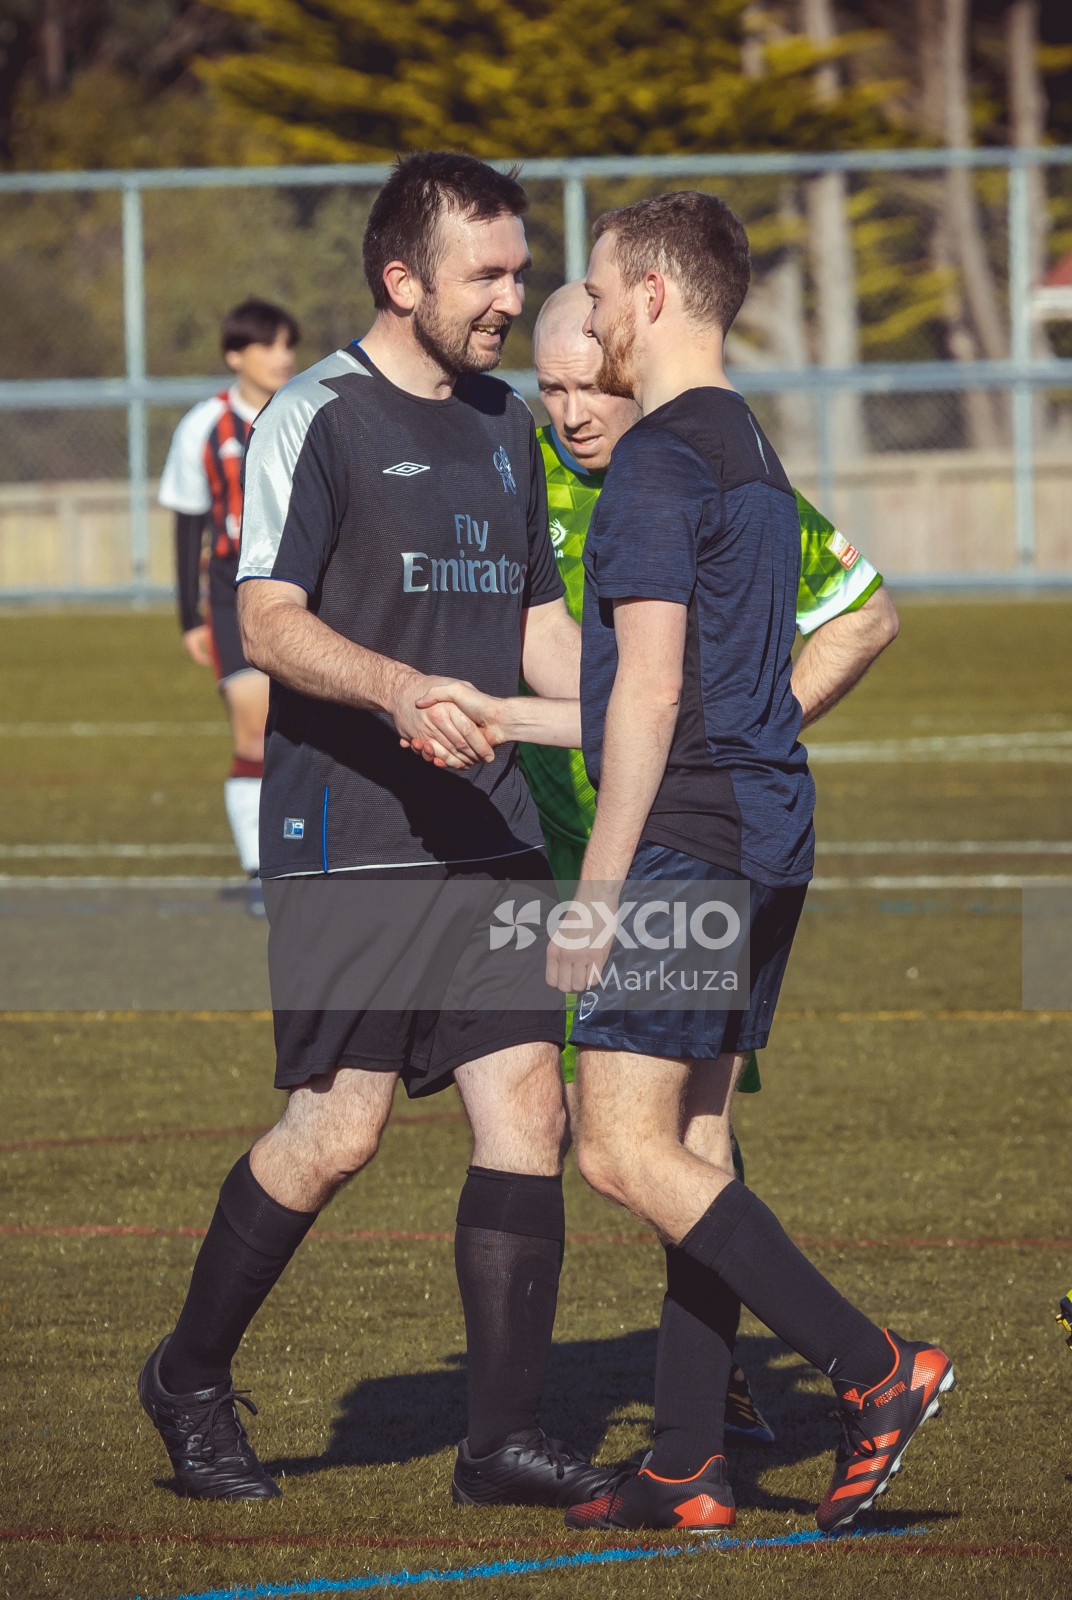 Smiling teammates shake hands at a football event - Sports Zone sunday league